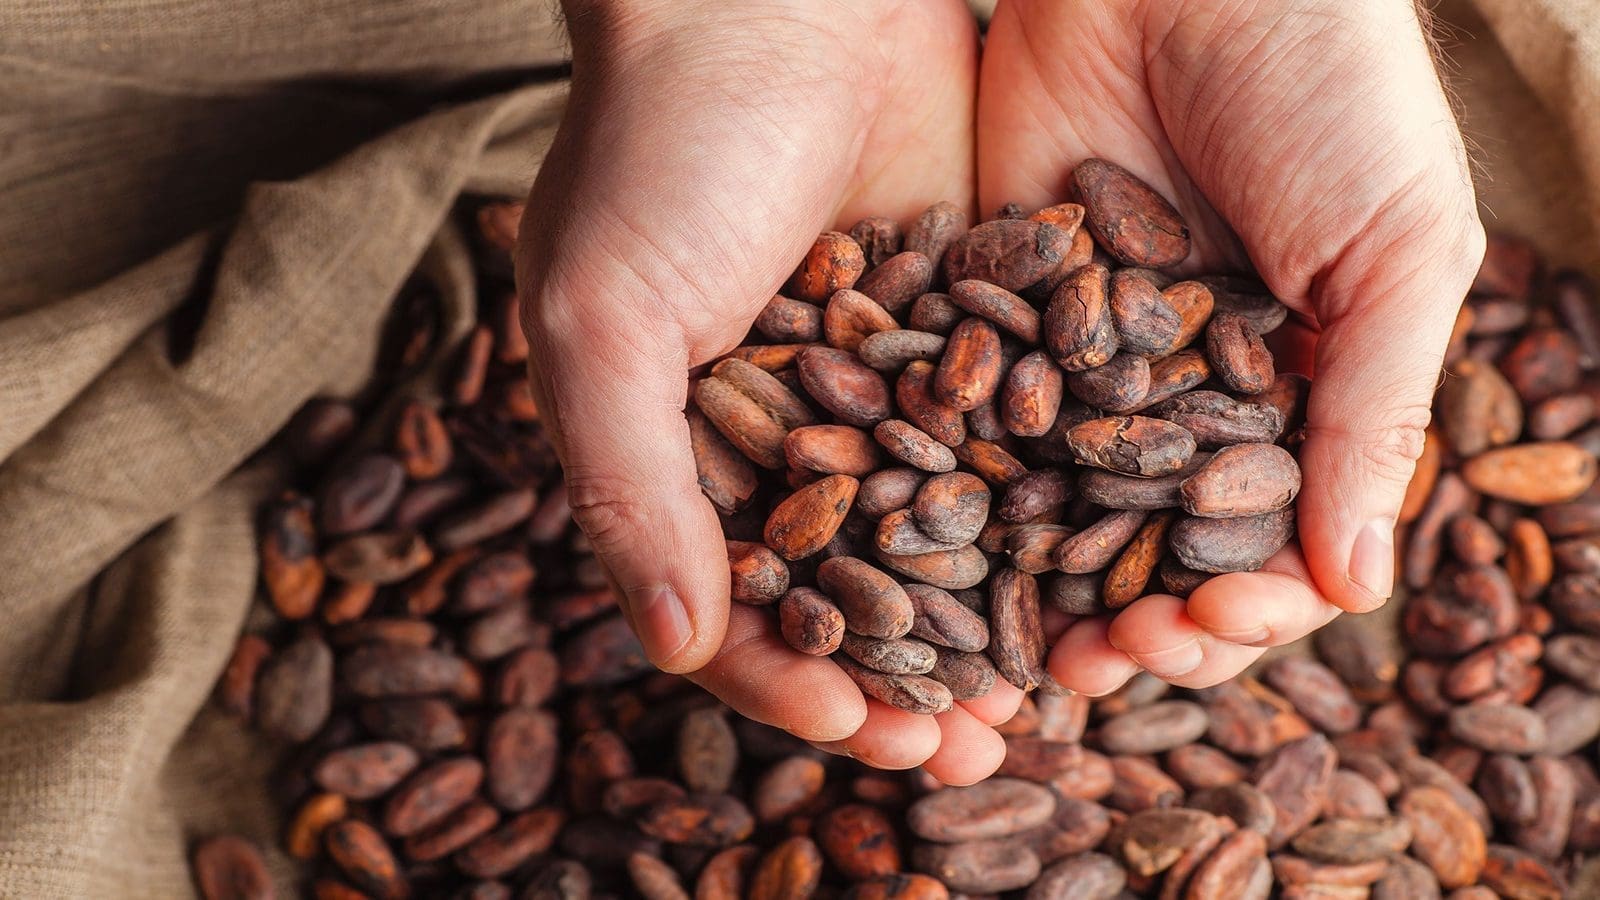 West Africa civil society groups call for EU to protect cocoa farmer incomes  